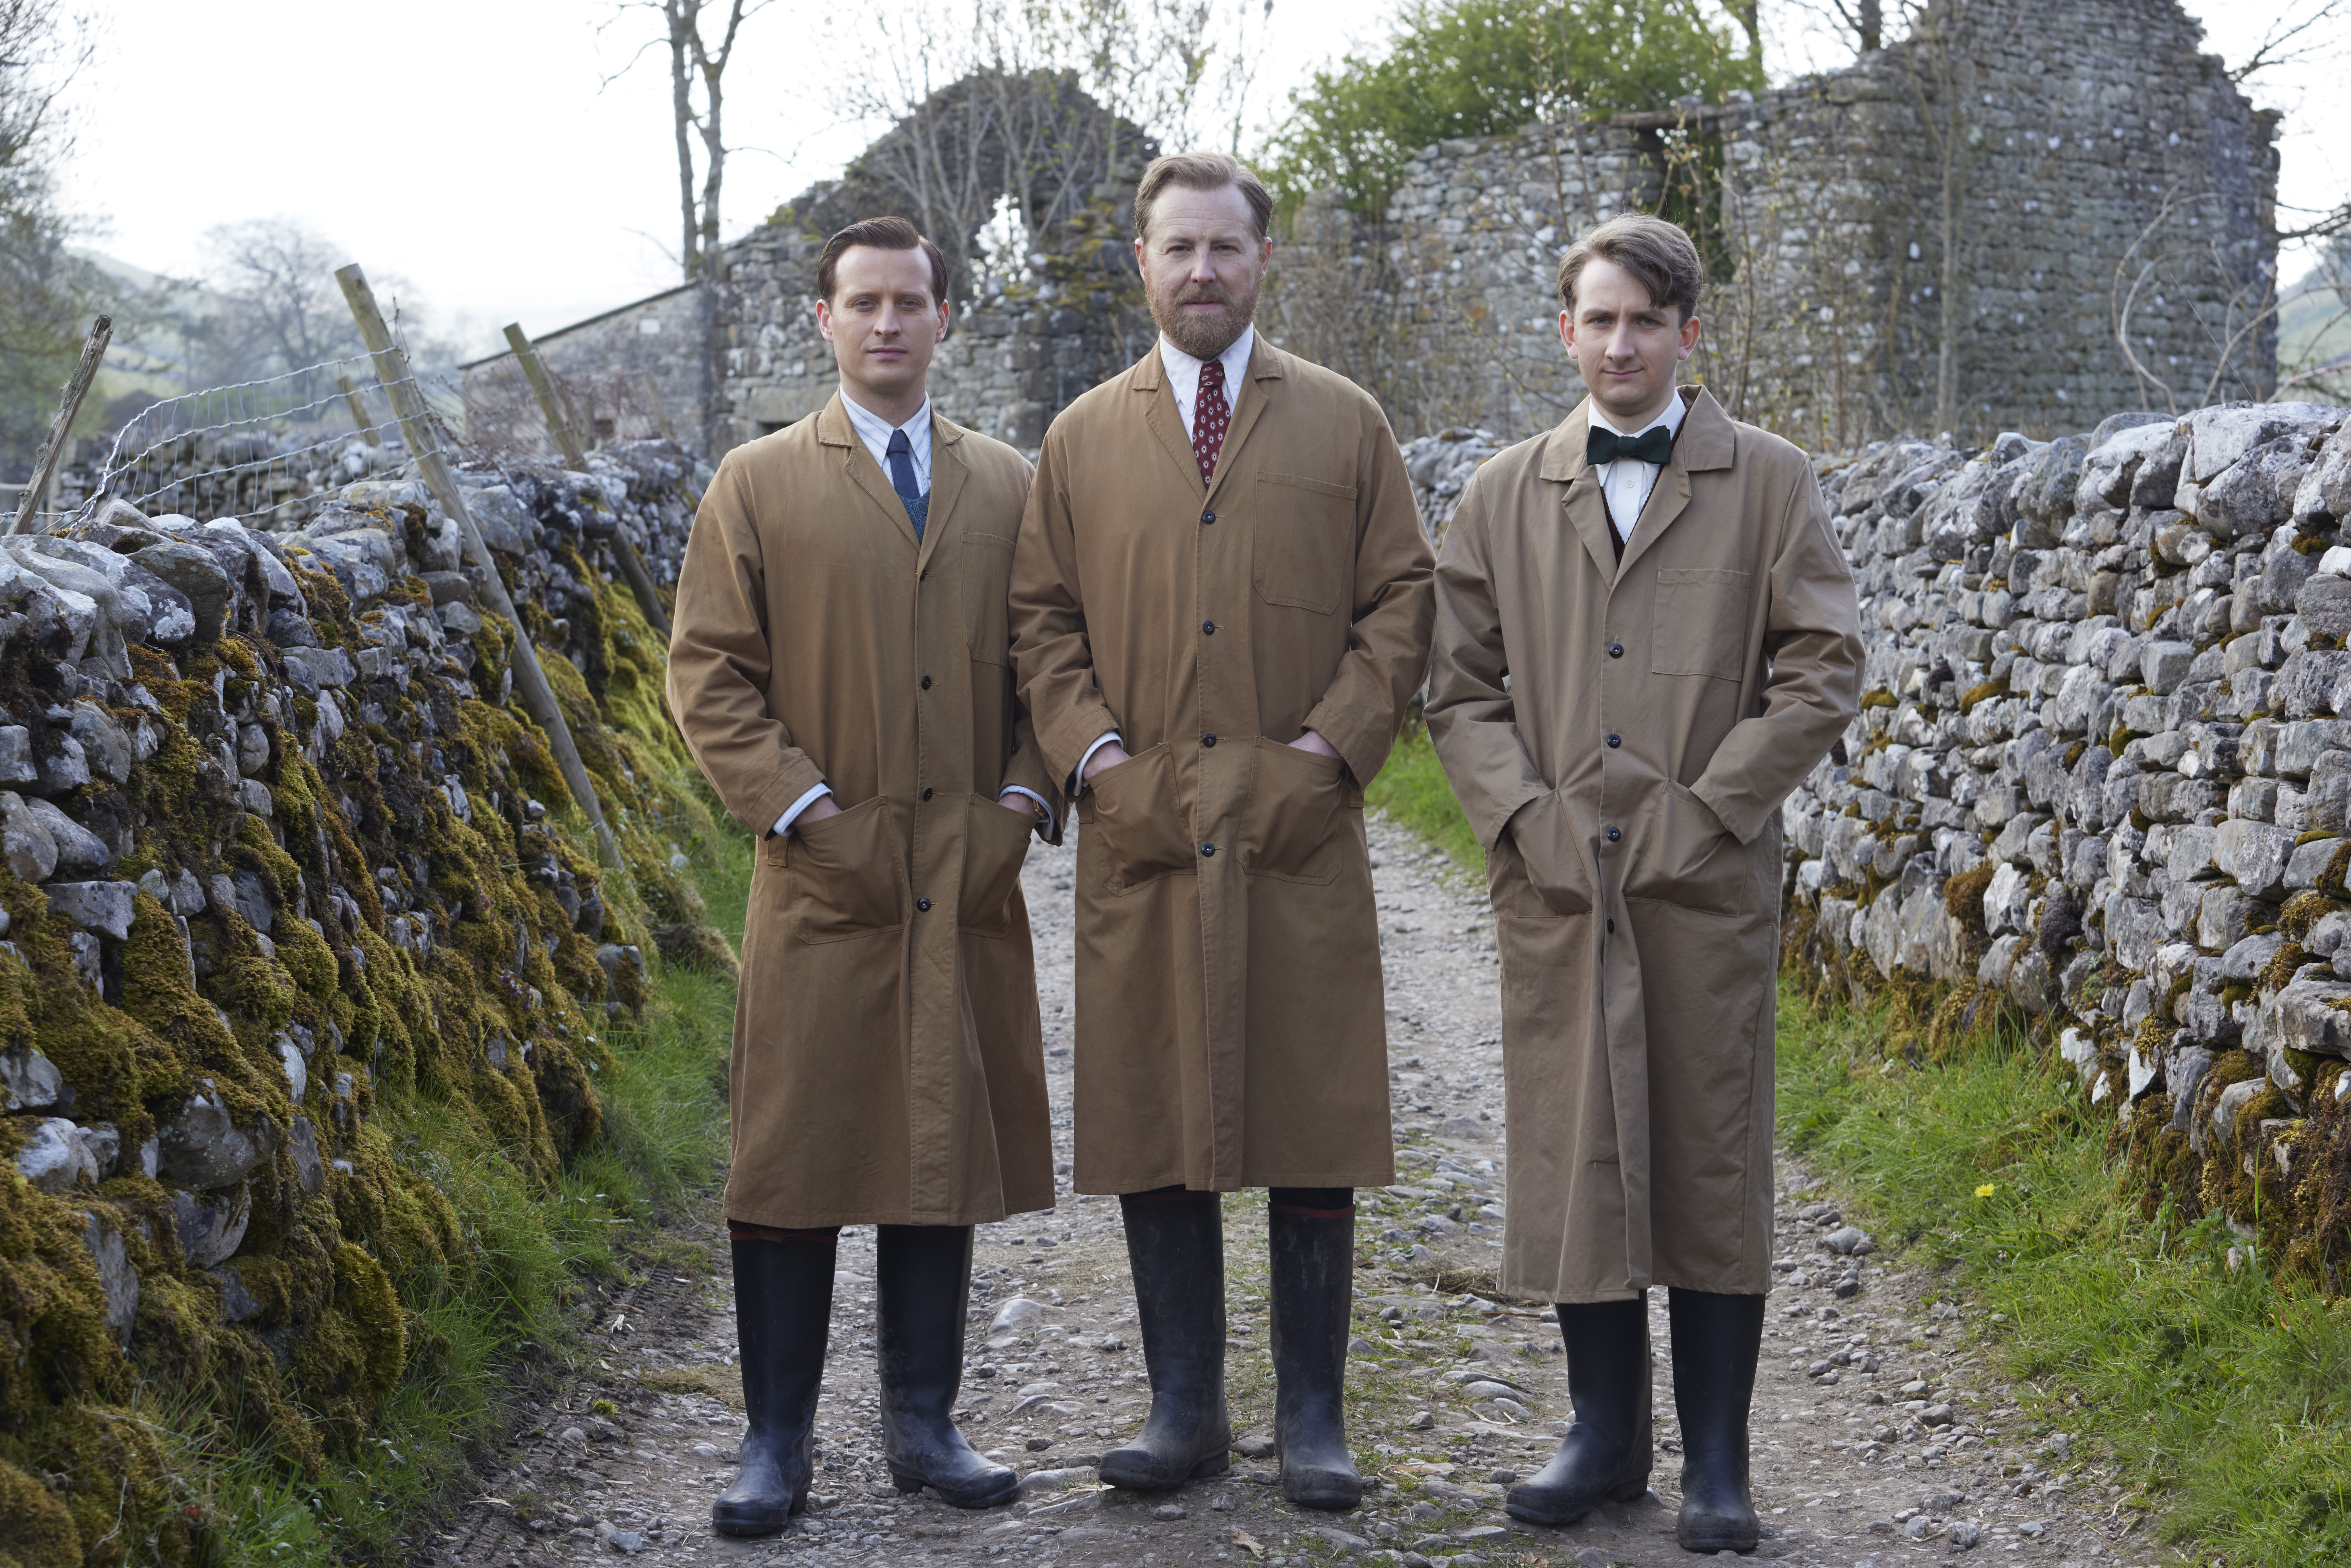 Picture shows: Dressed to clean, James Herriot (Nicholas Ralph), Siegfried Farnon (Samuel West), and Richard Carmody (James Anthony-Rose) stand in a stony lane edged with drystone walls. They are wearing heavy-coats for messy work.